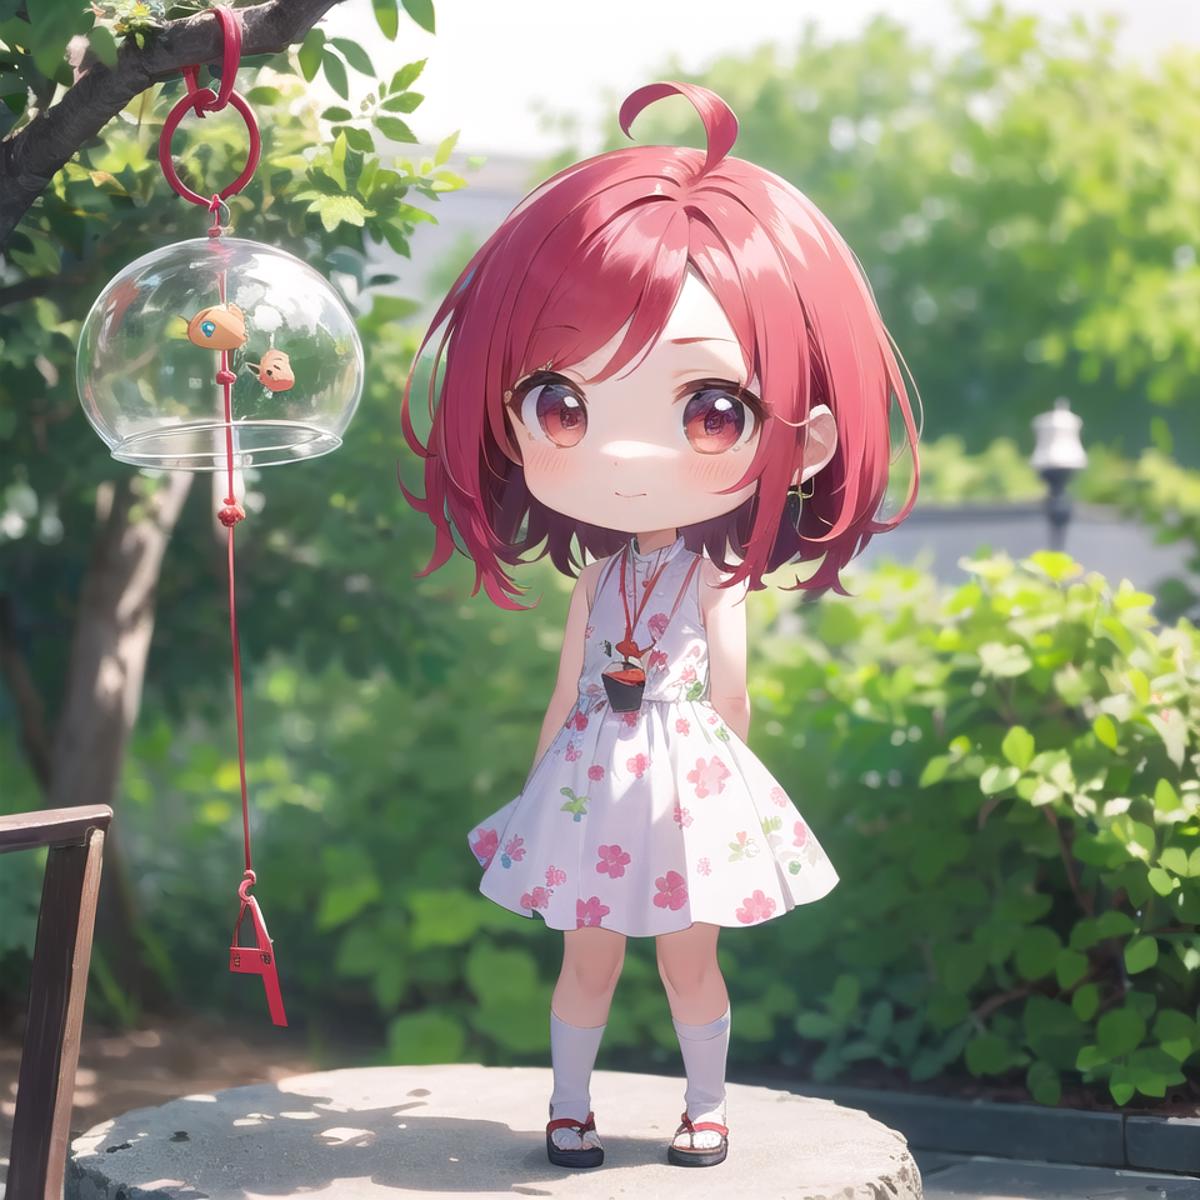 furin_LoHa / wind chimes / wind bell image by spacecat